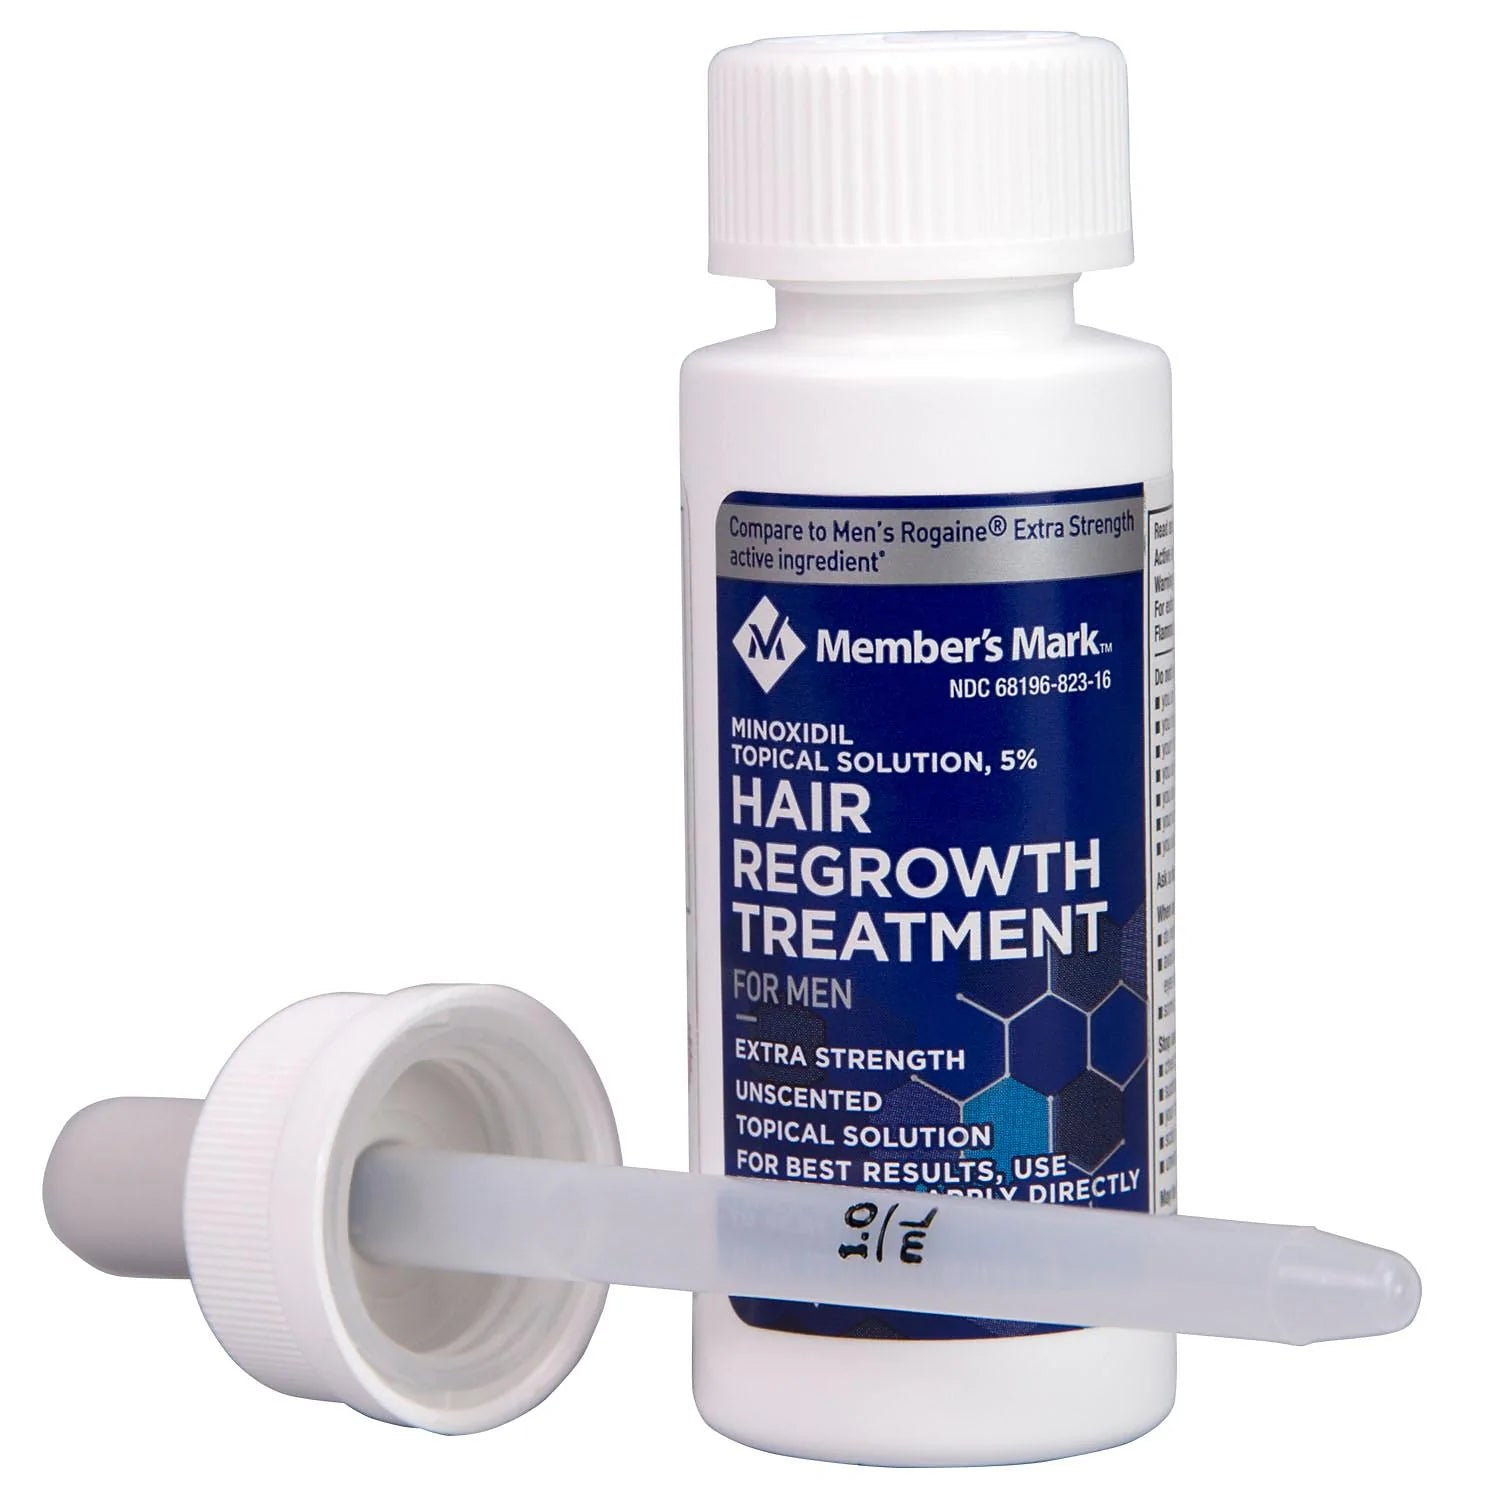 Member's Mark Minoxidil 5%, Hair Regrowth Treatment for Men (6 Month Supply)